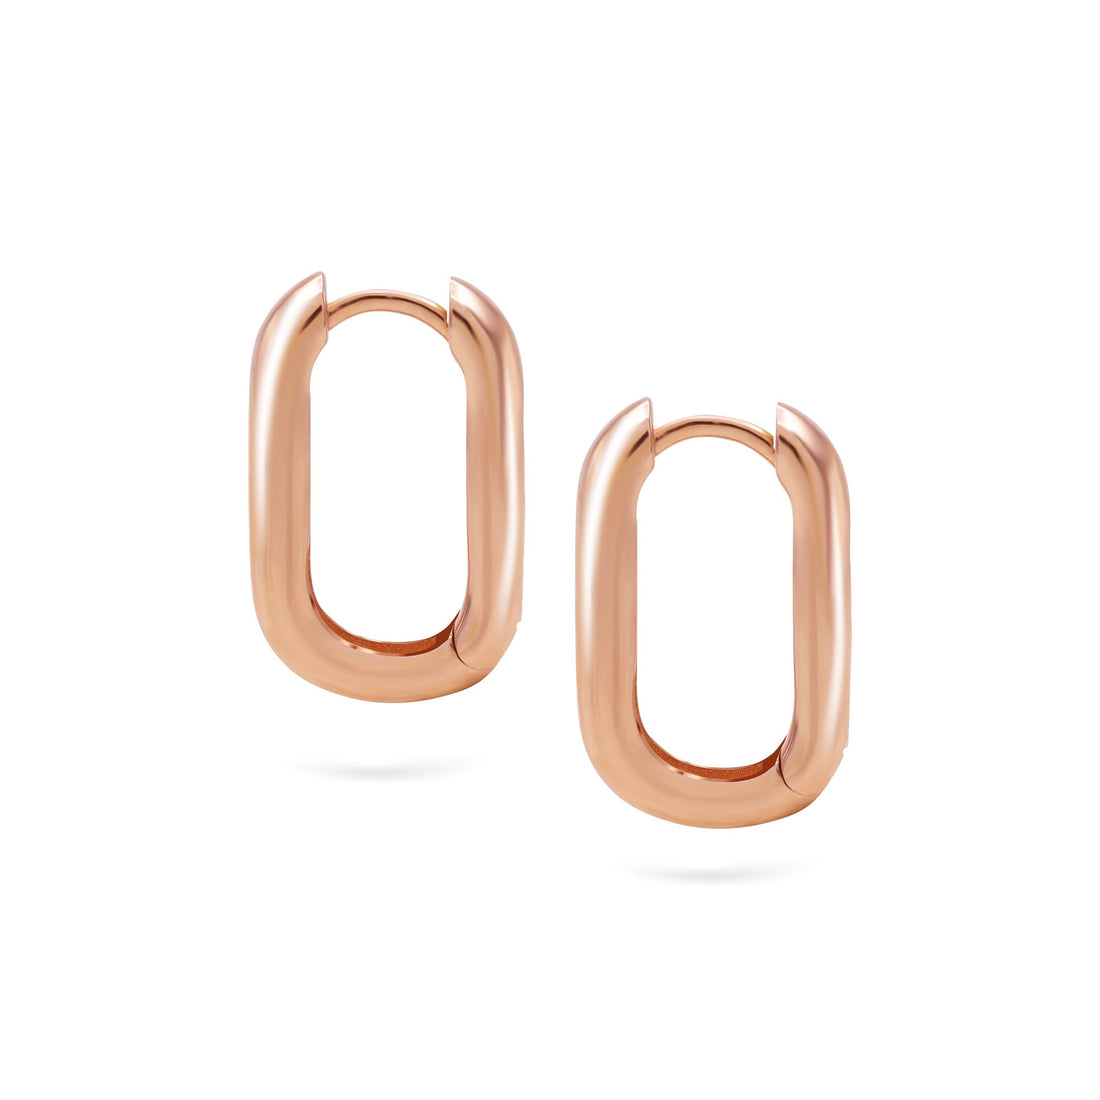 Jewelry Curved Goldens Hoops | Large Gold Earrings | 14K - Rose / Pair - earrings Zengoda Shop online from